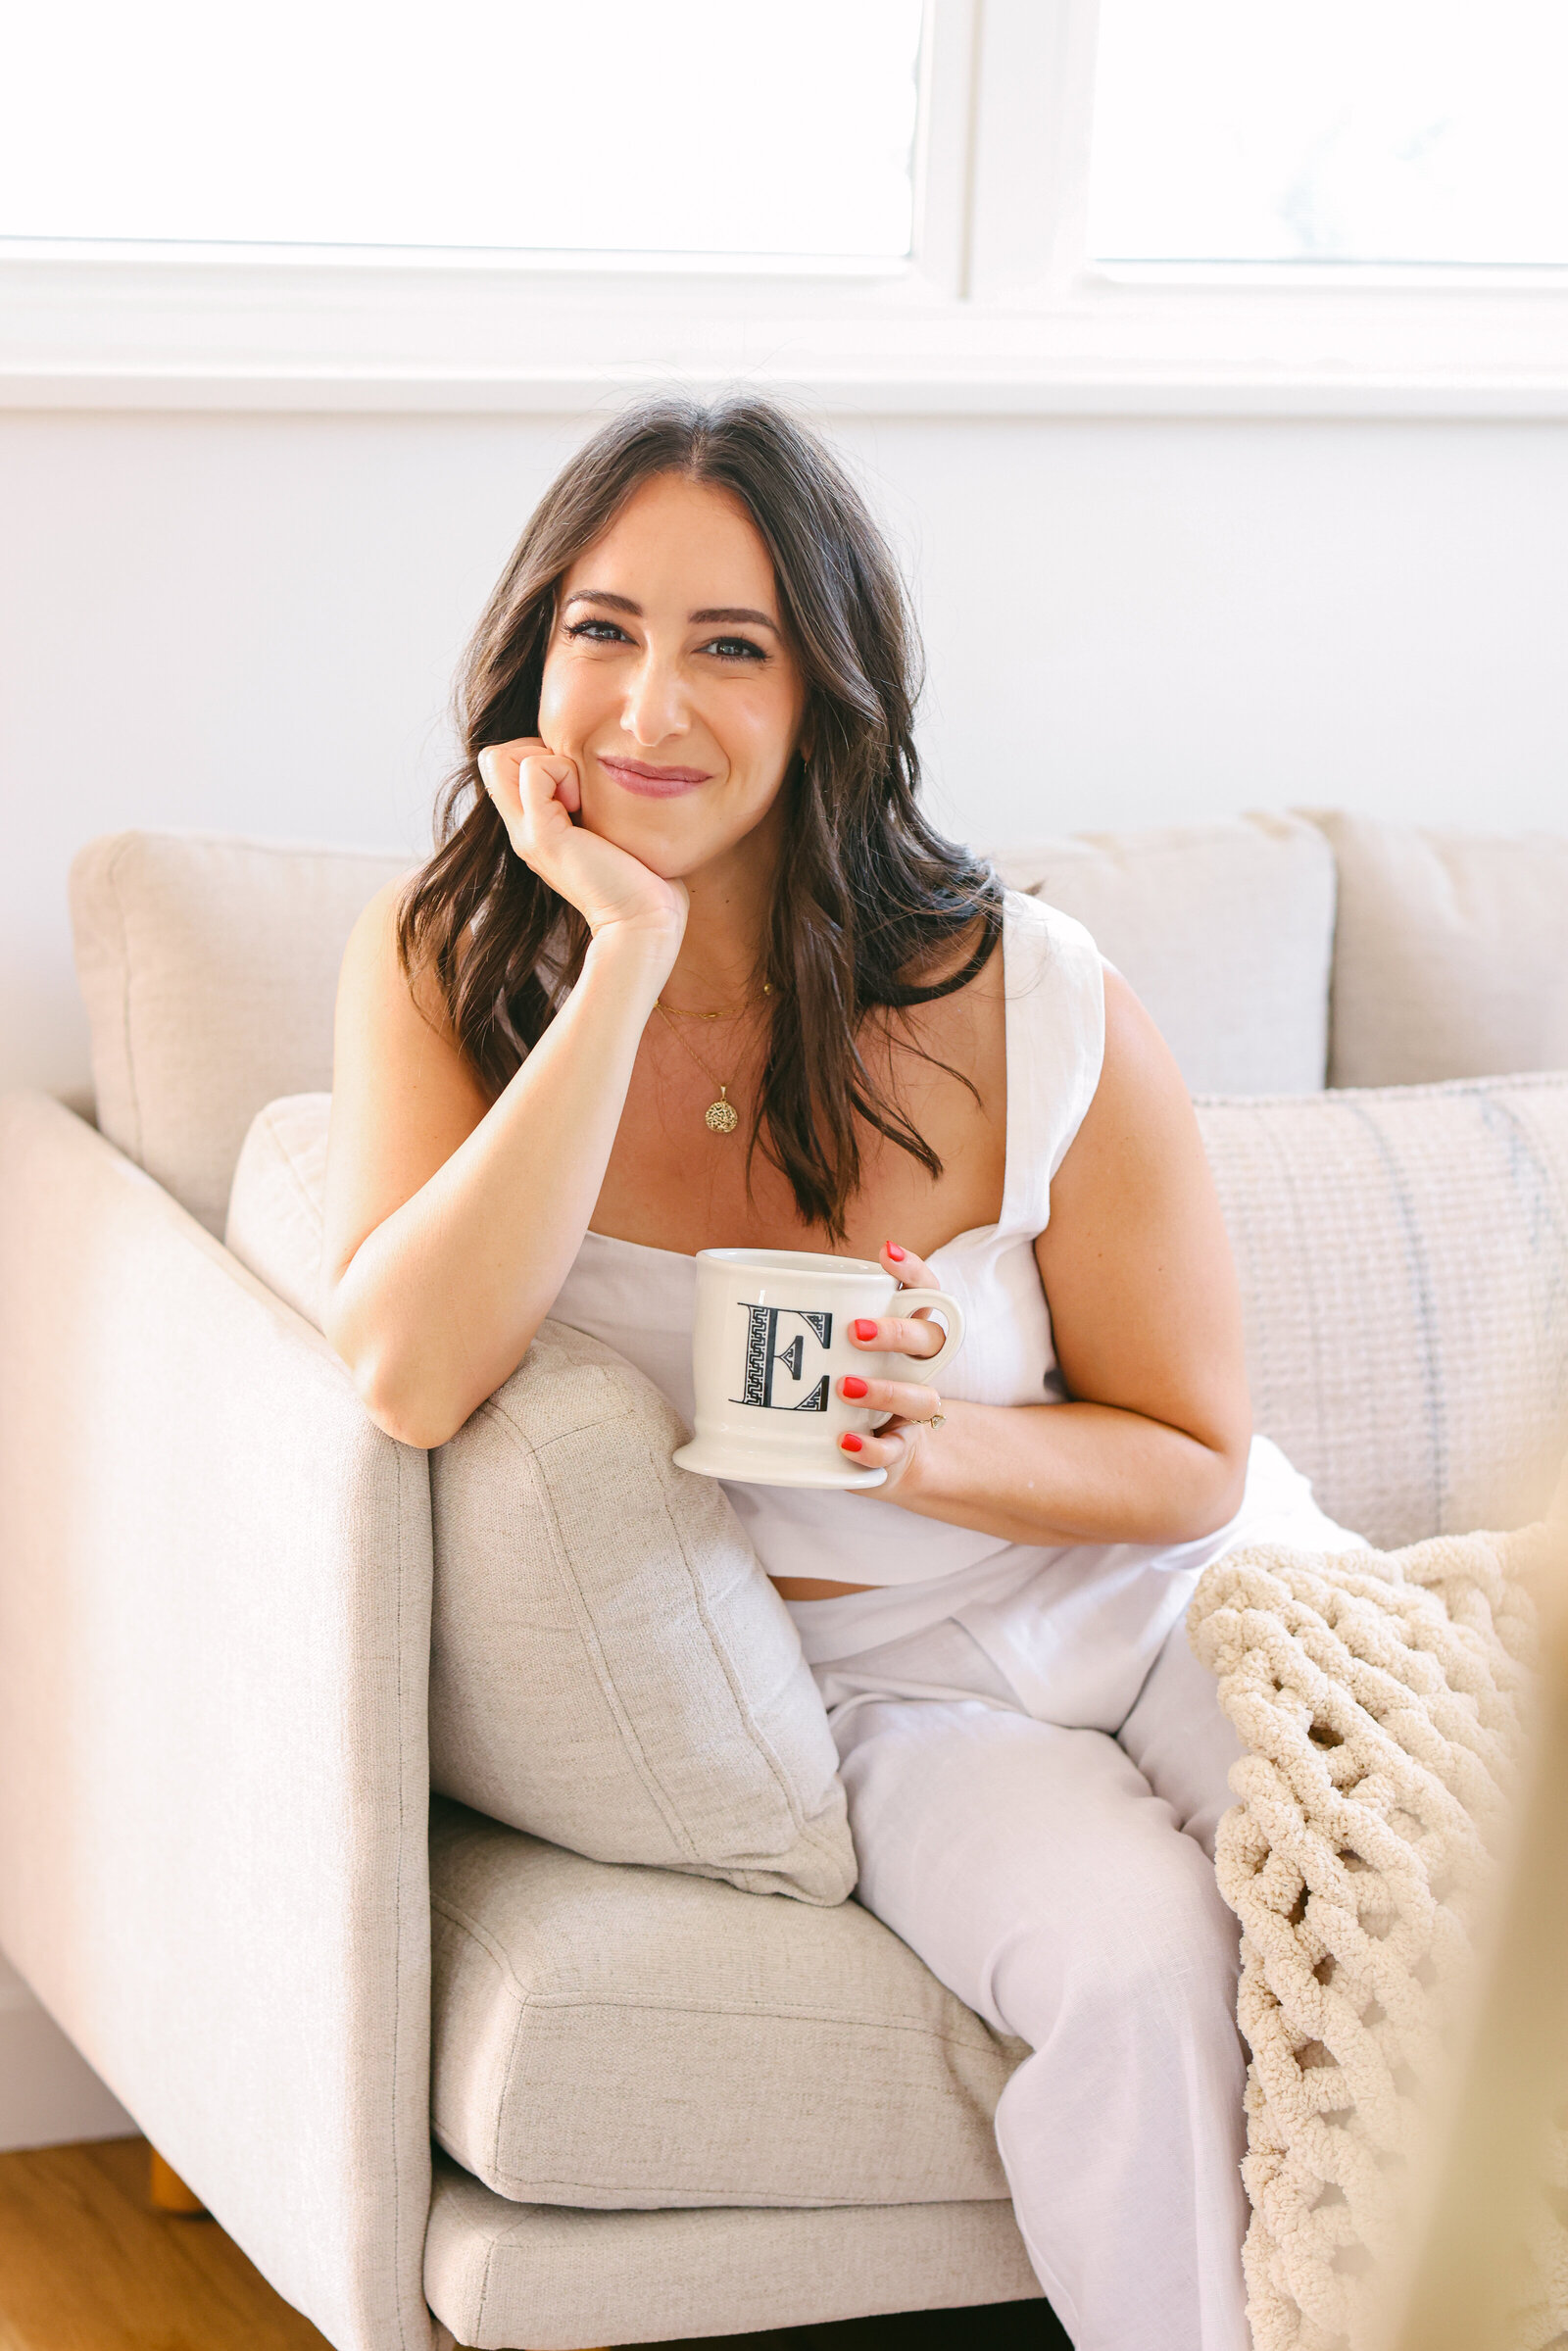 Women Dating Coach Therapist and Life Coach sitting on couch in minimal clean creamy white outfit drinking coffee brand photography session